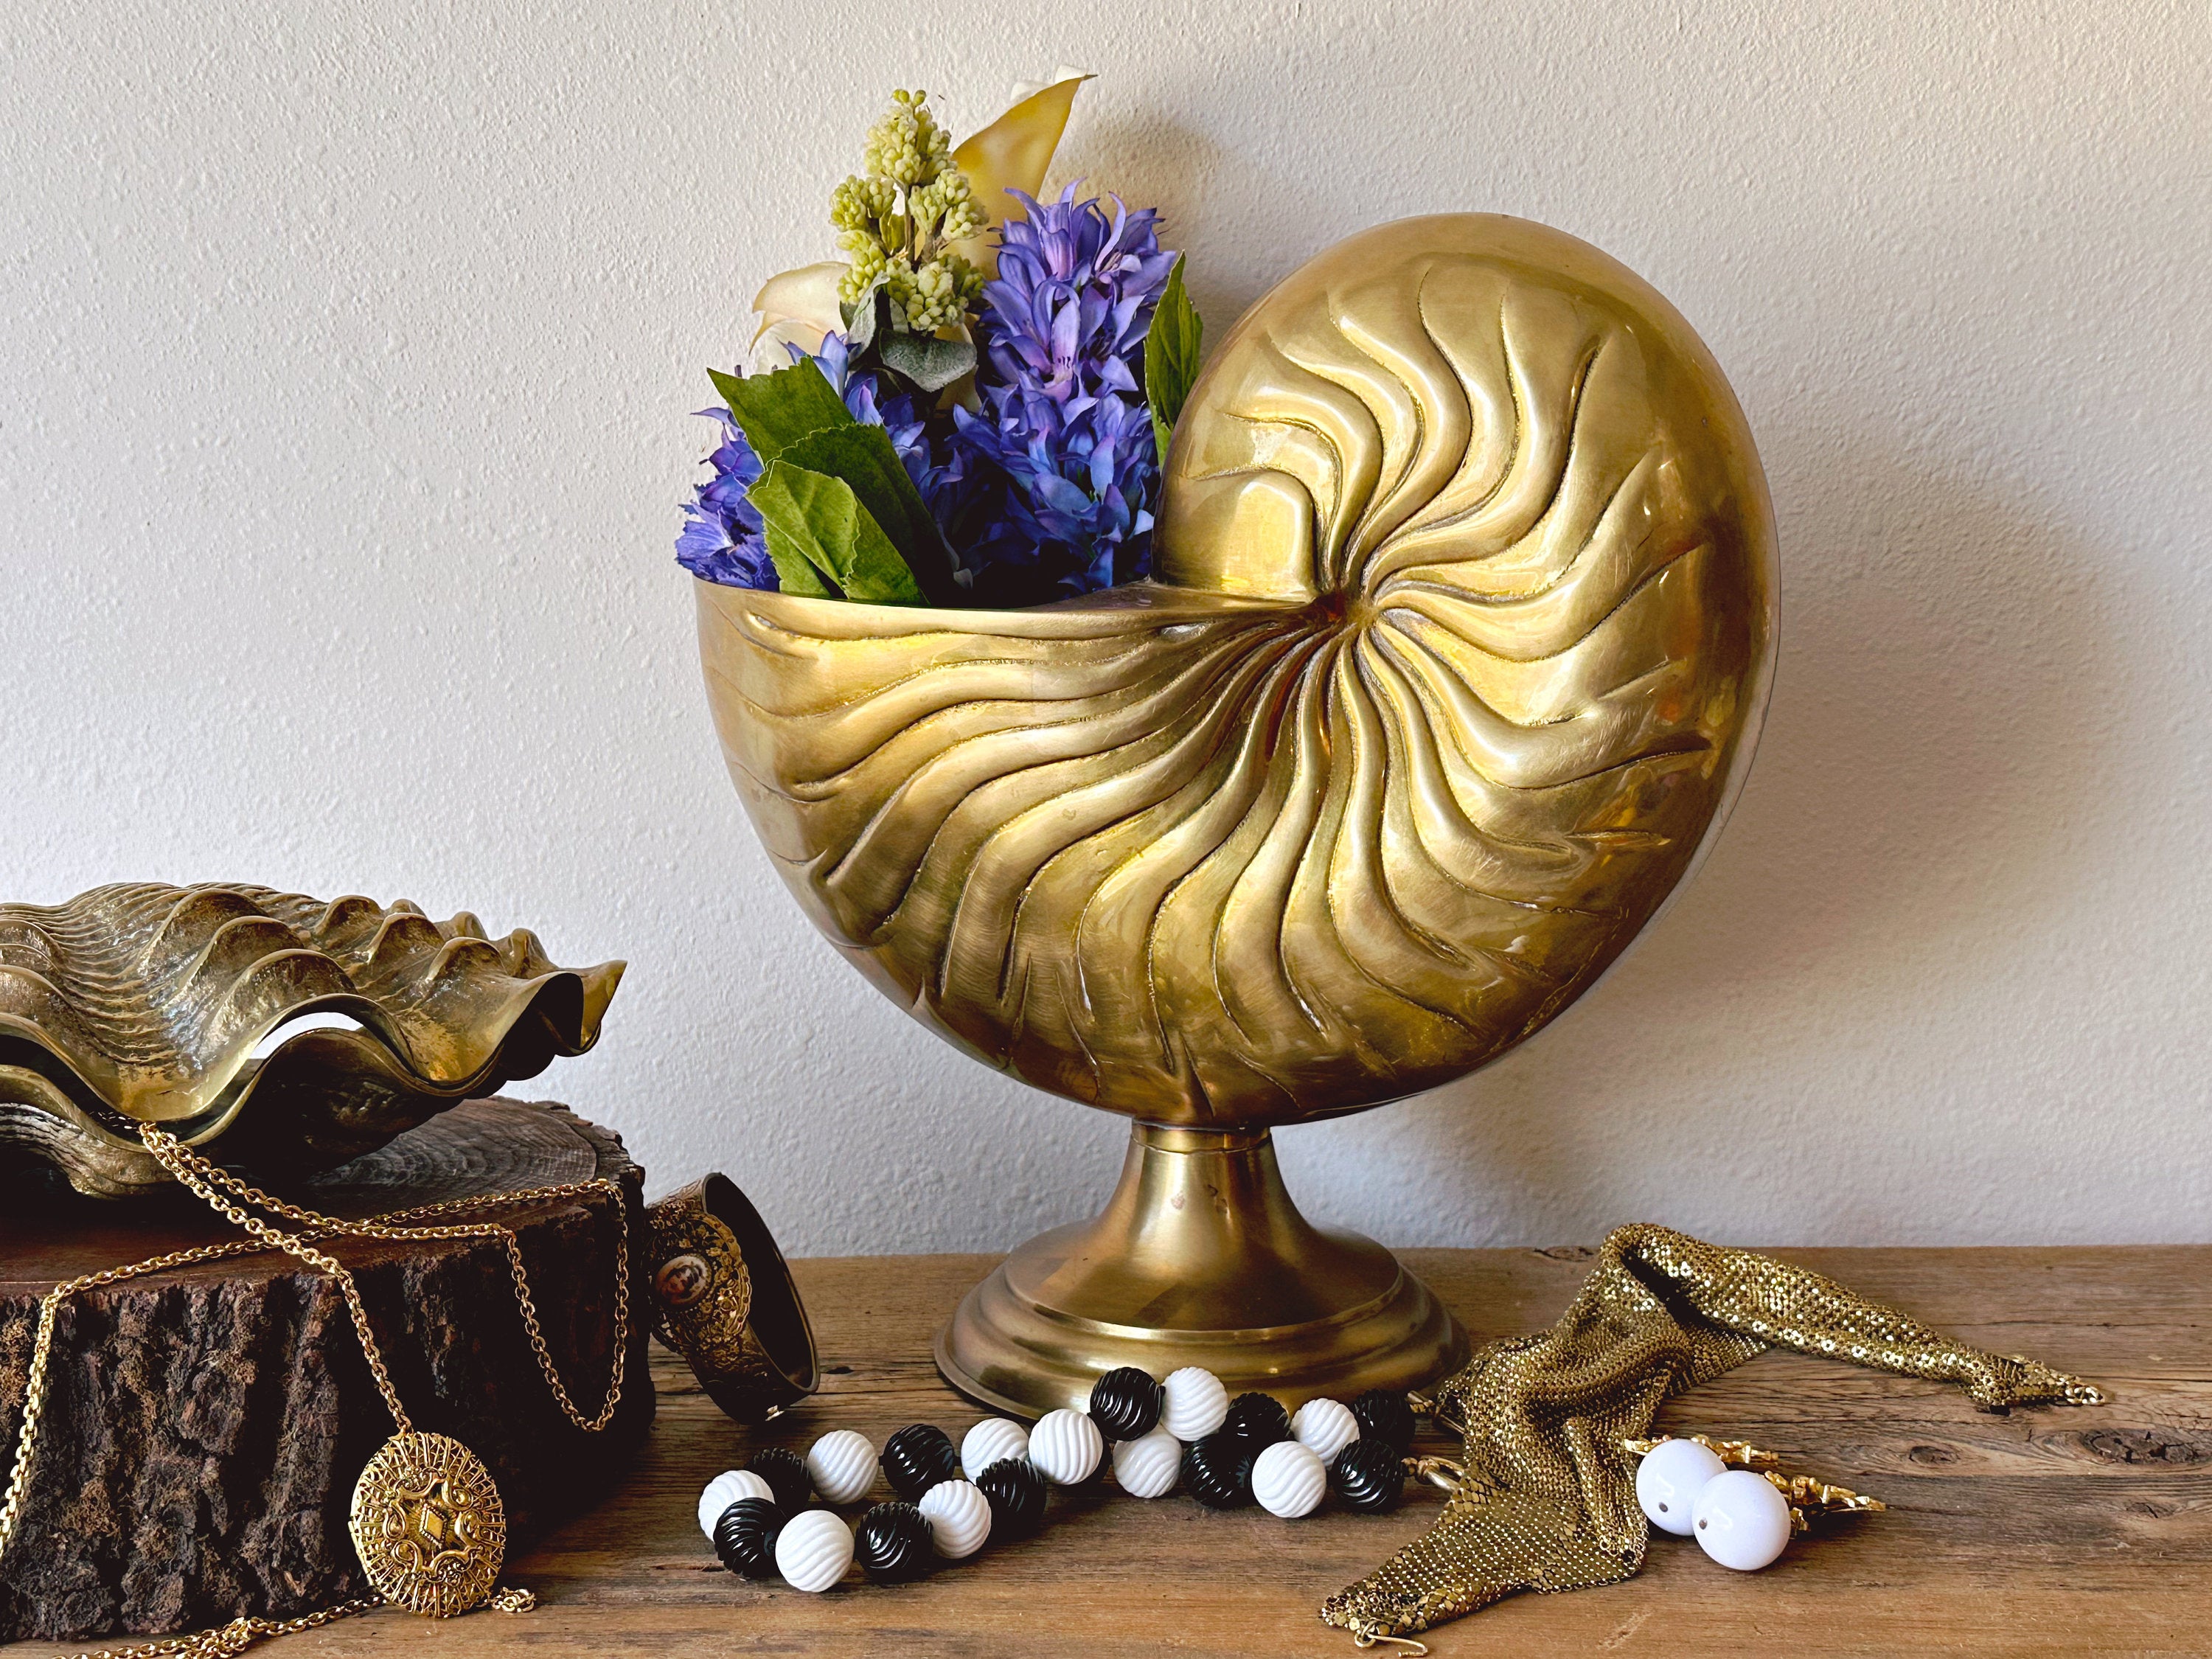 Large Vintage Brass Nautilus Sea Shell Wine Chiller or Planter